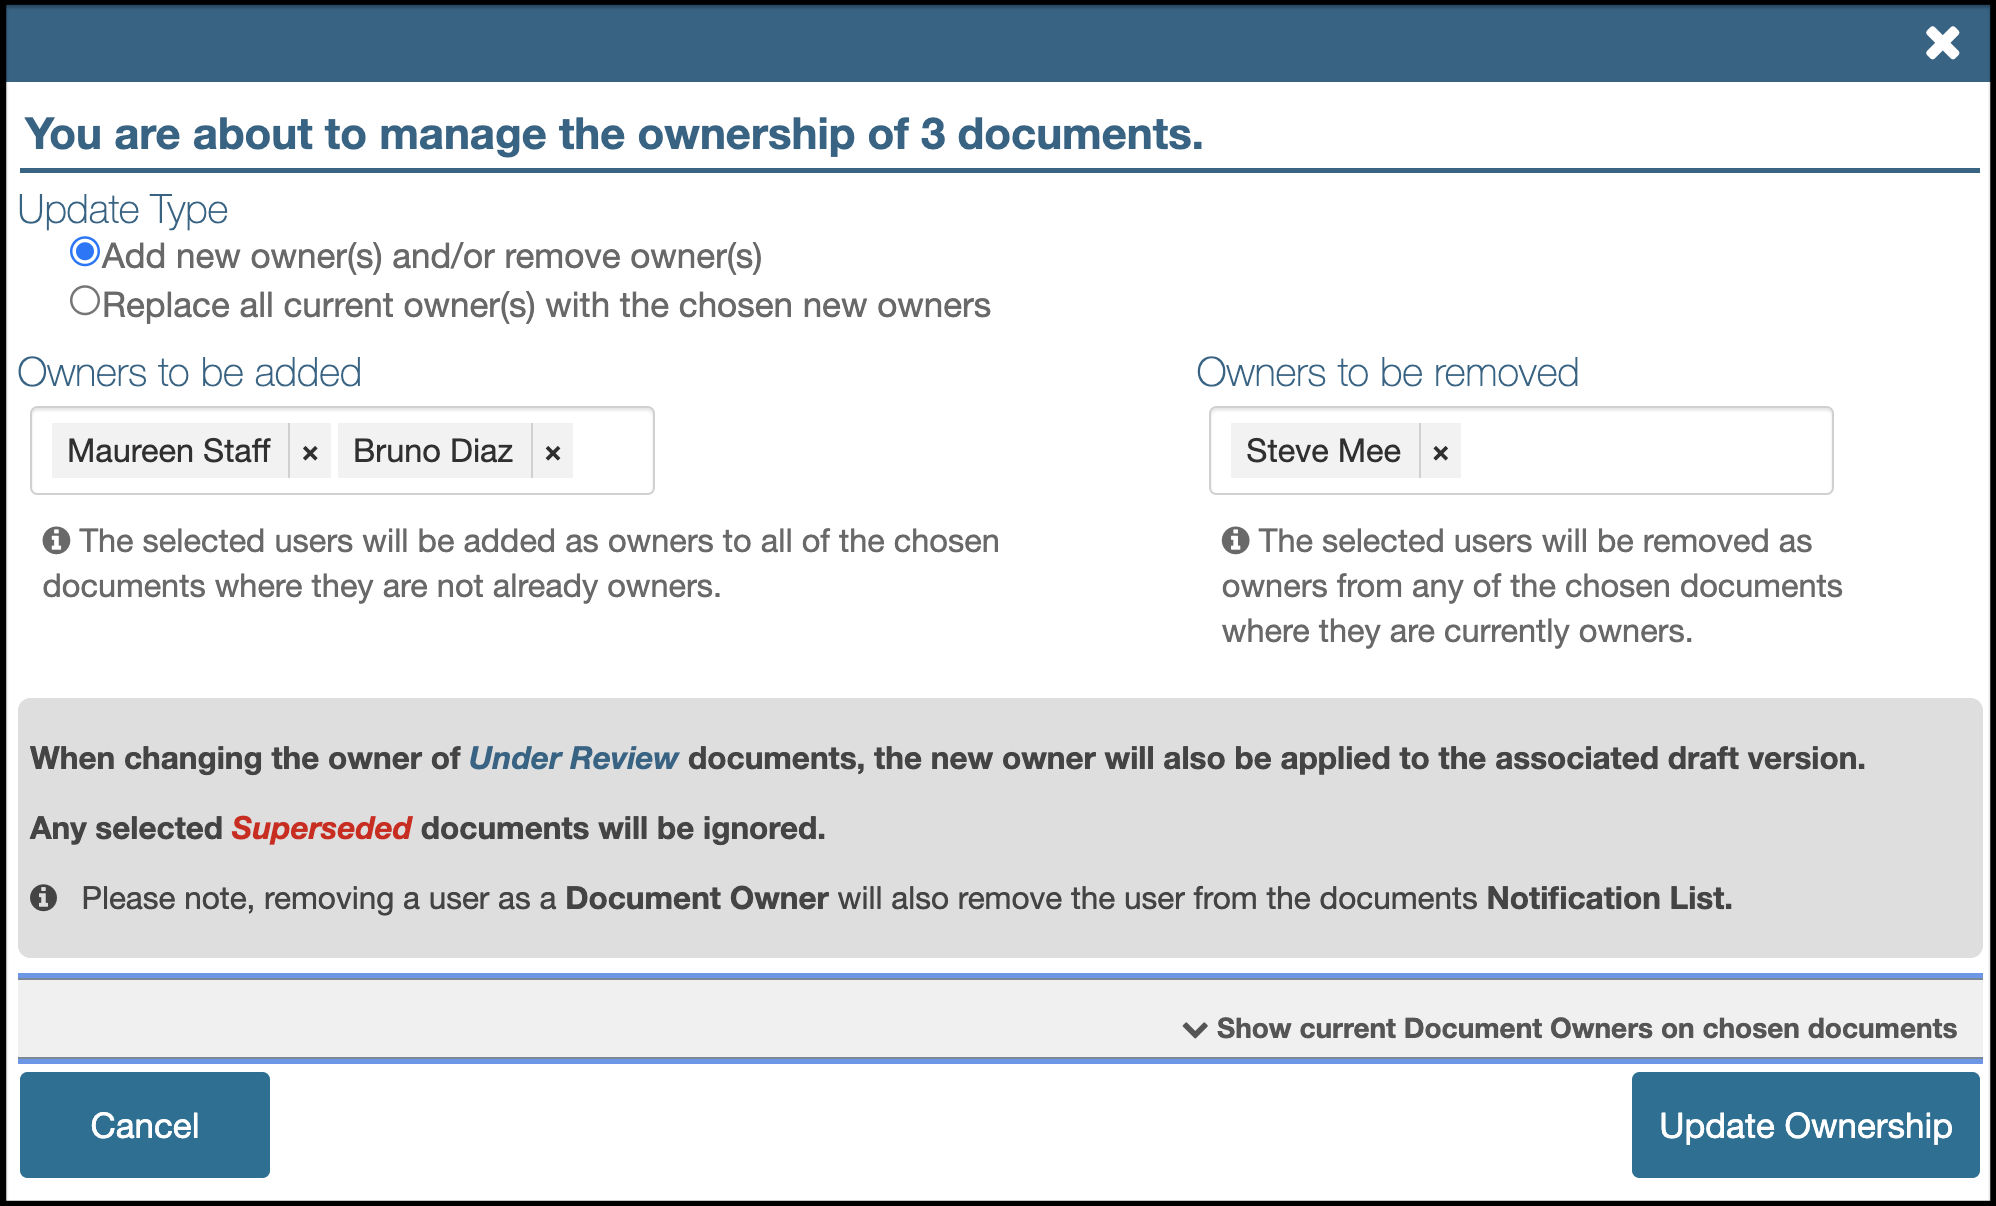 Similar image of the manage ownership Lightbox. This time is is not expanded and has a user selected in the removal field.